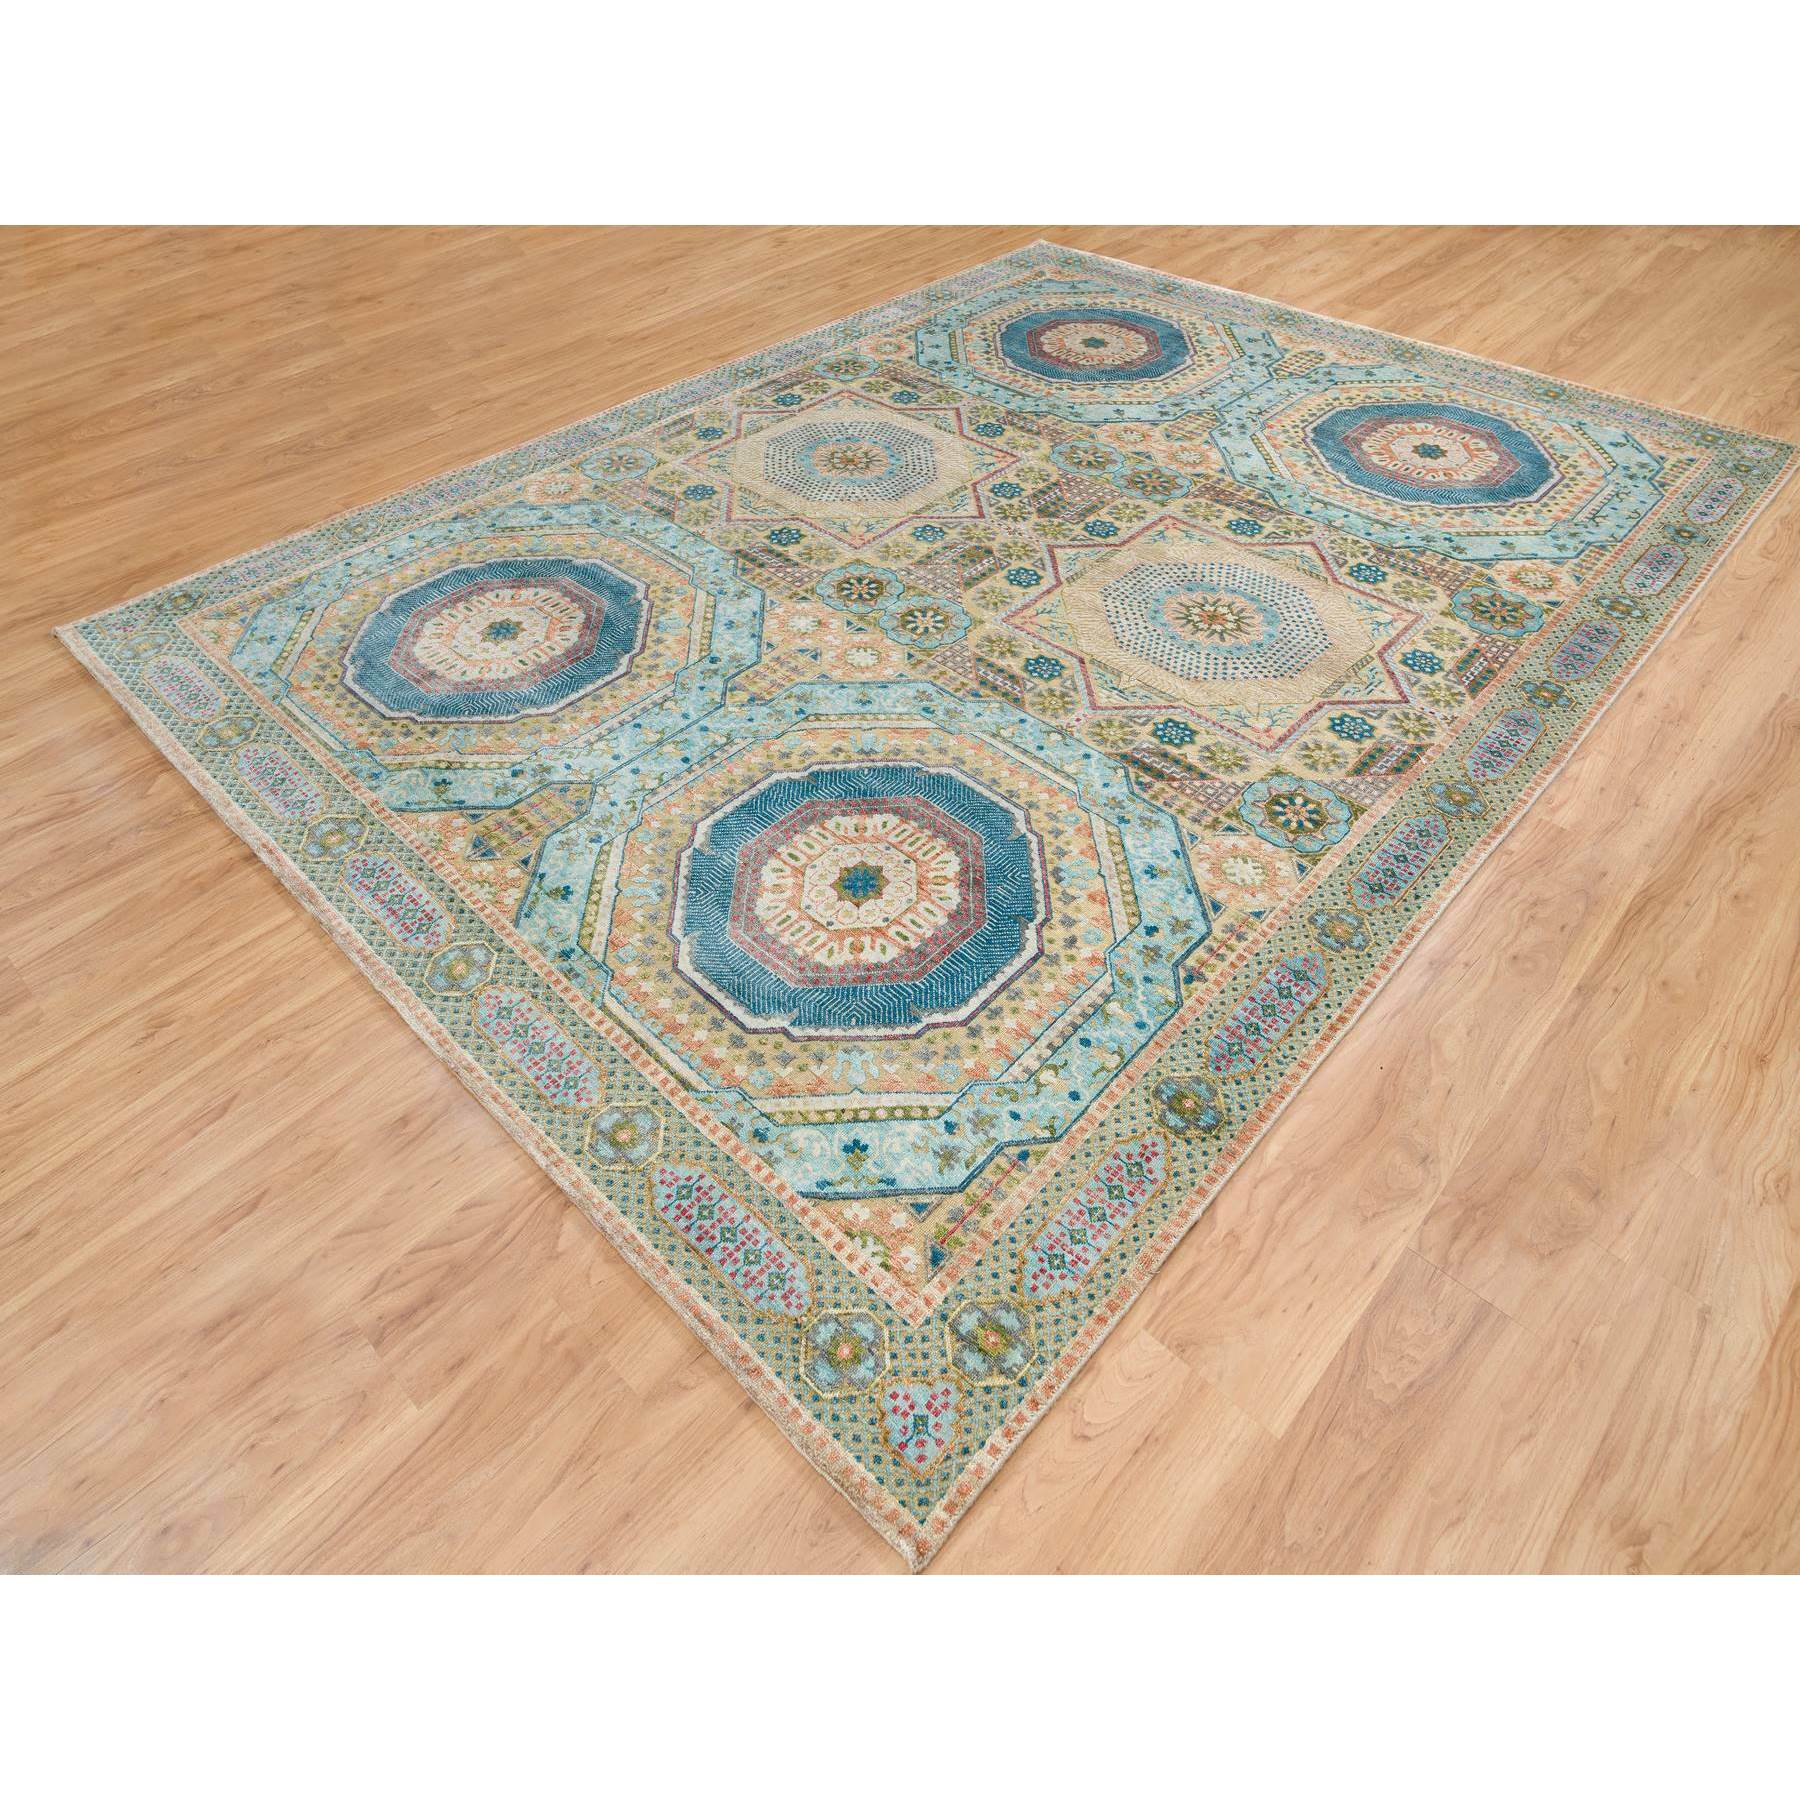 9'x12'1" Colorful, Hand Woven Mamluk Design with Geometric Medallions, Textured Wool and Silk, Oriental Rug 